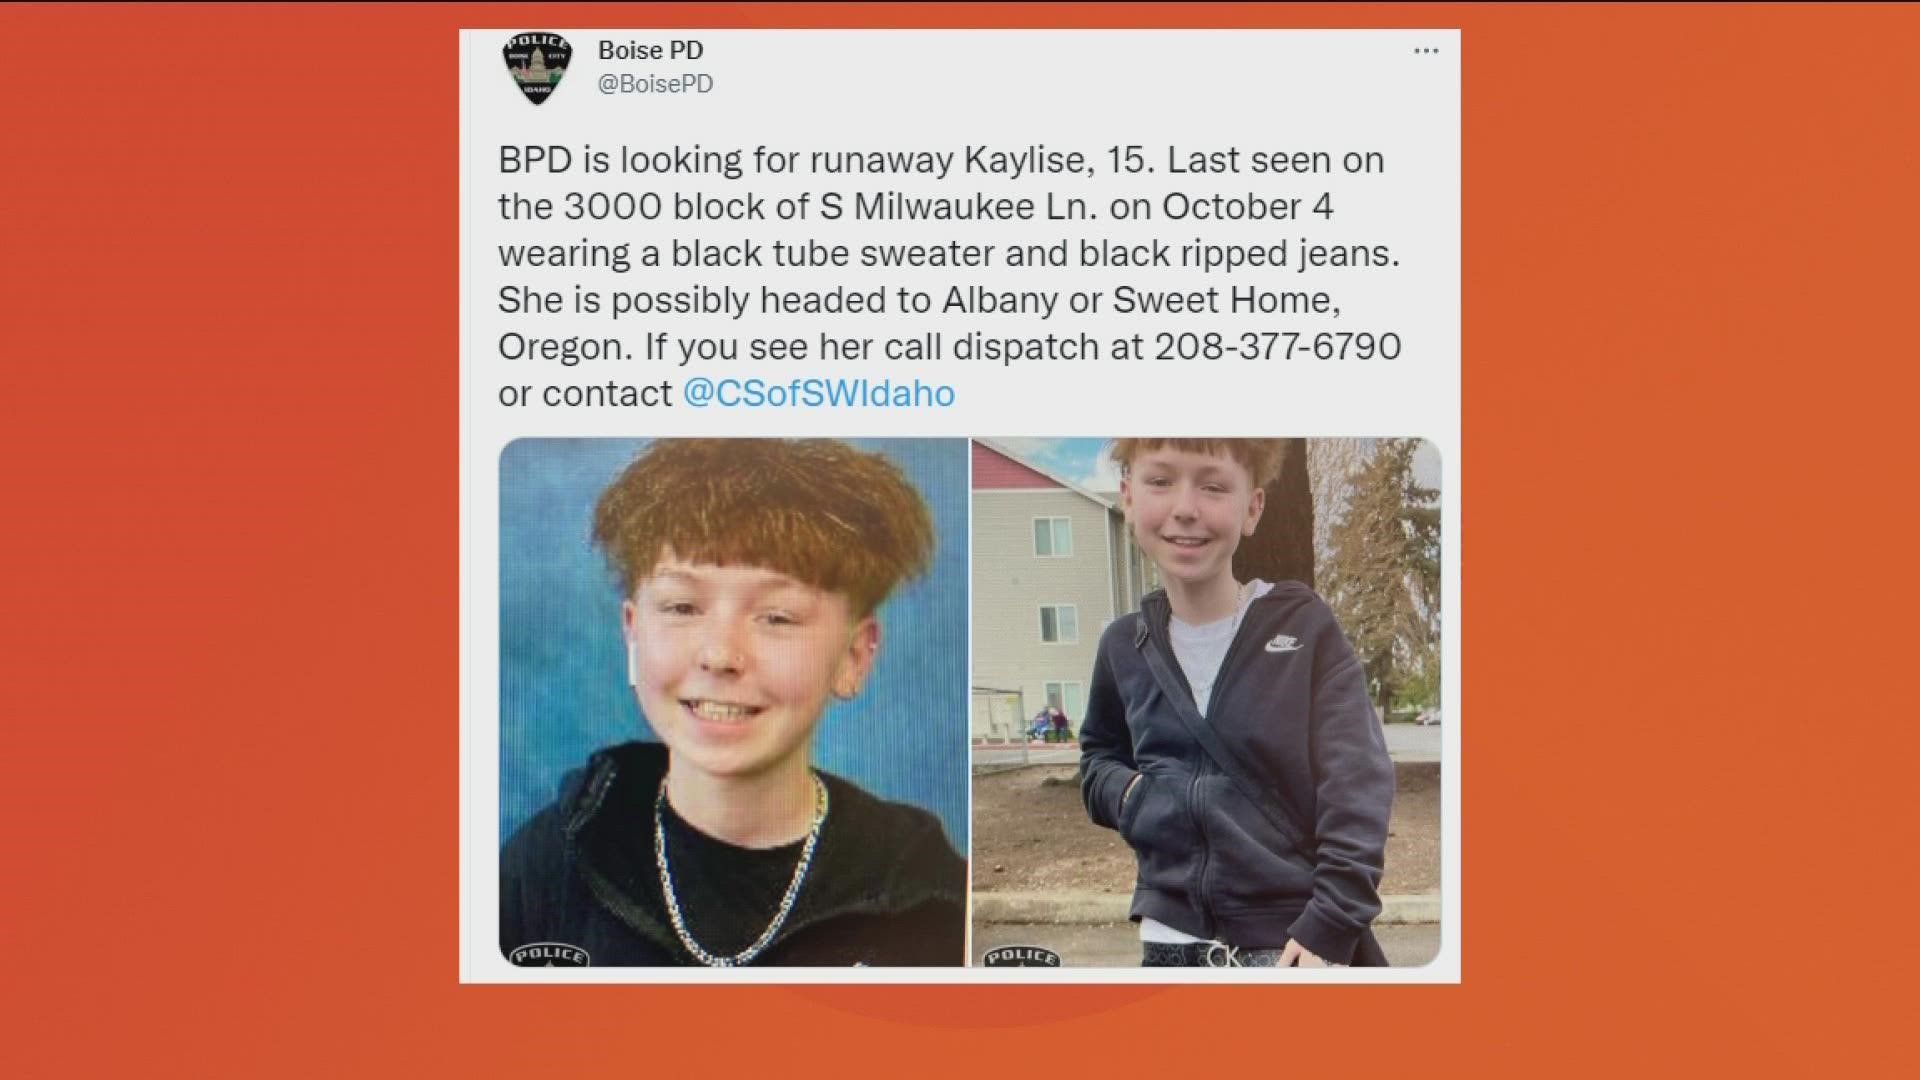 Kaylise was last seen on Oct. 4, wearing a black tube sweater and black ripped jeans.